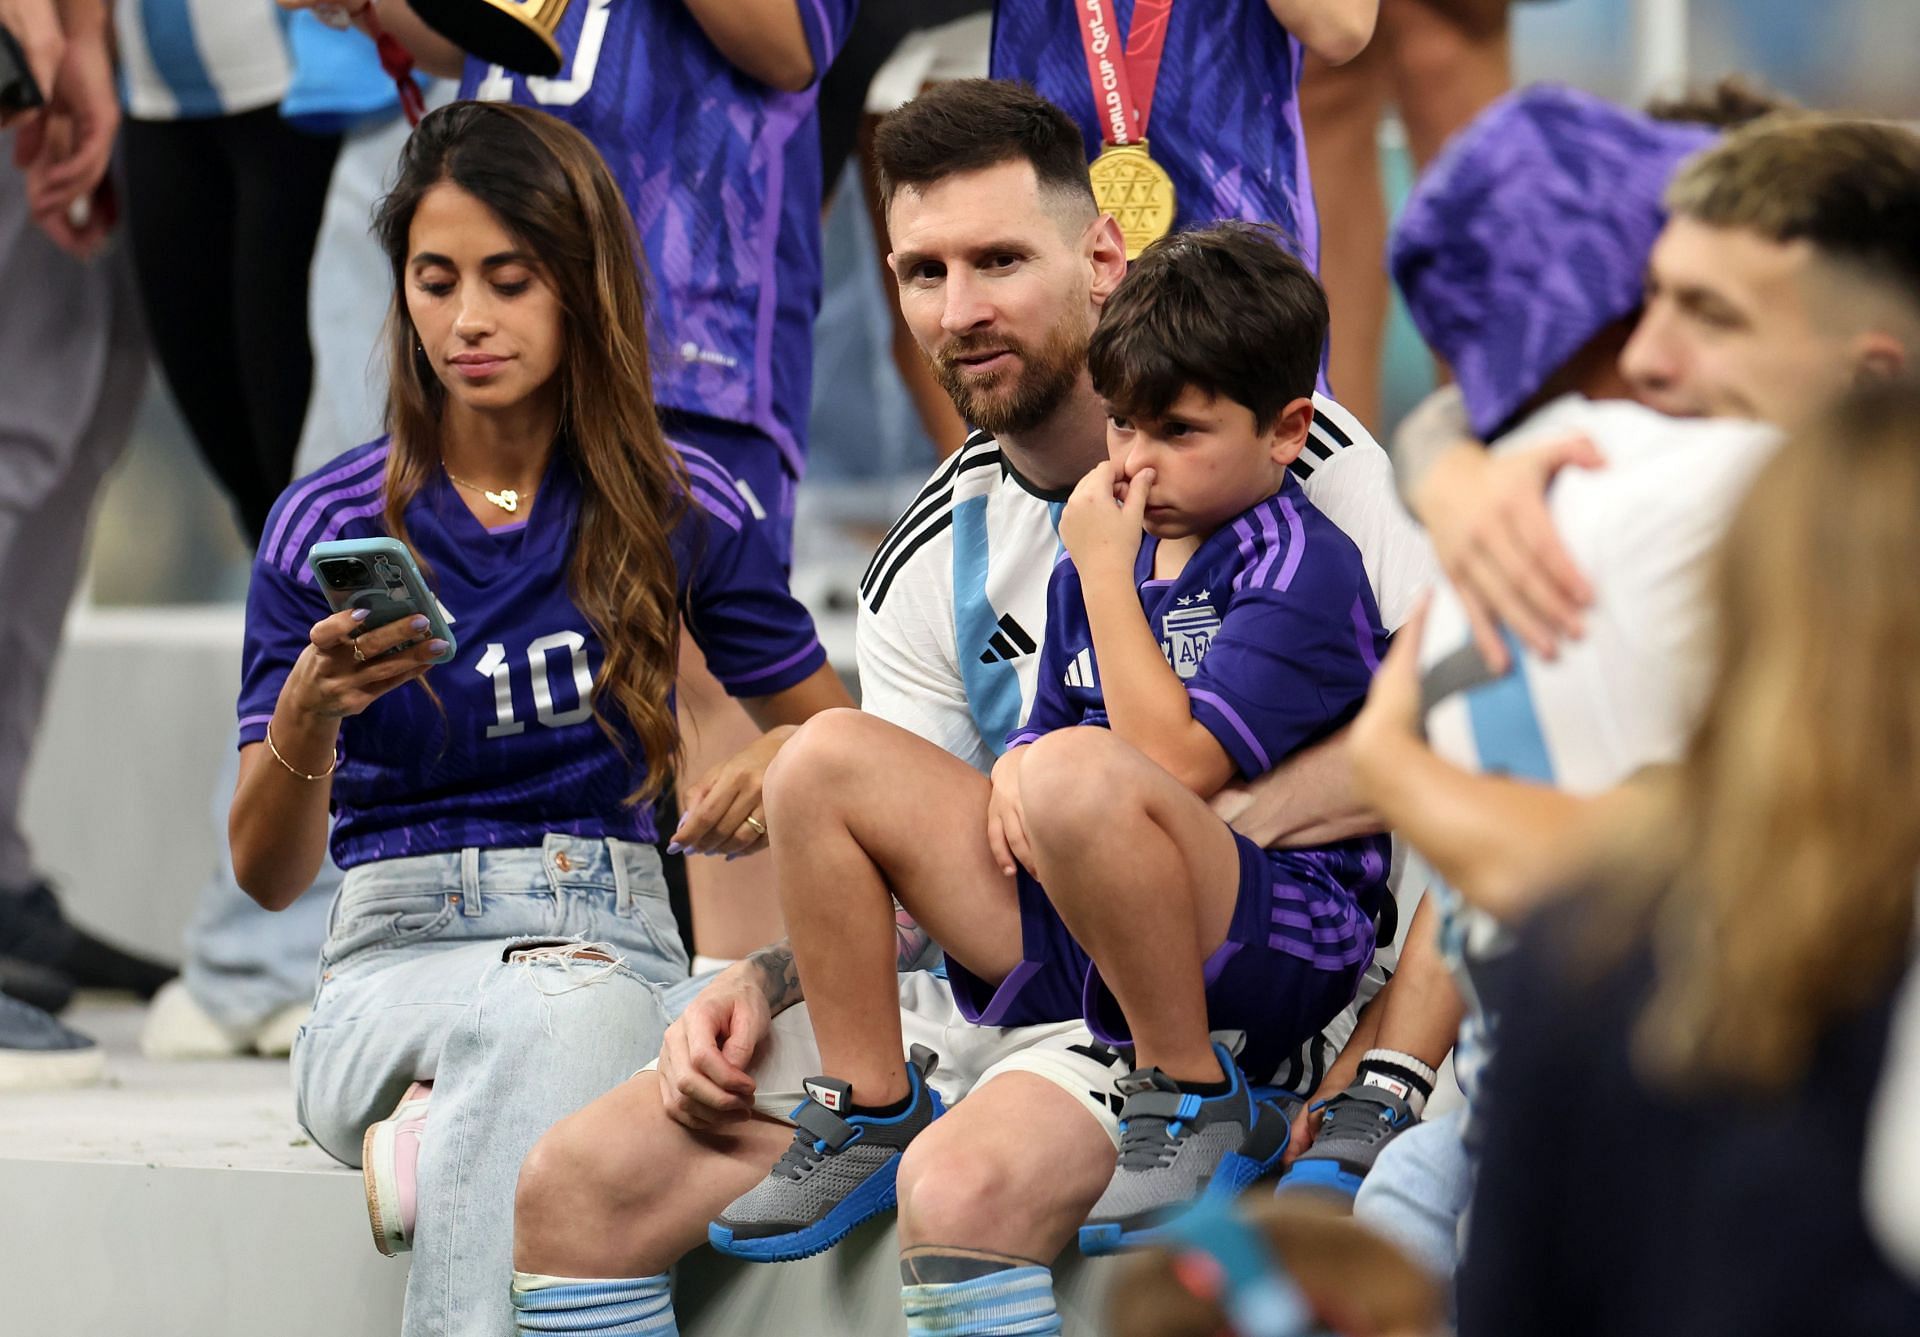 The Messi family moved from Barcelona to Paris in 2021.